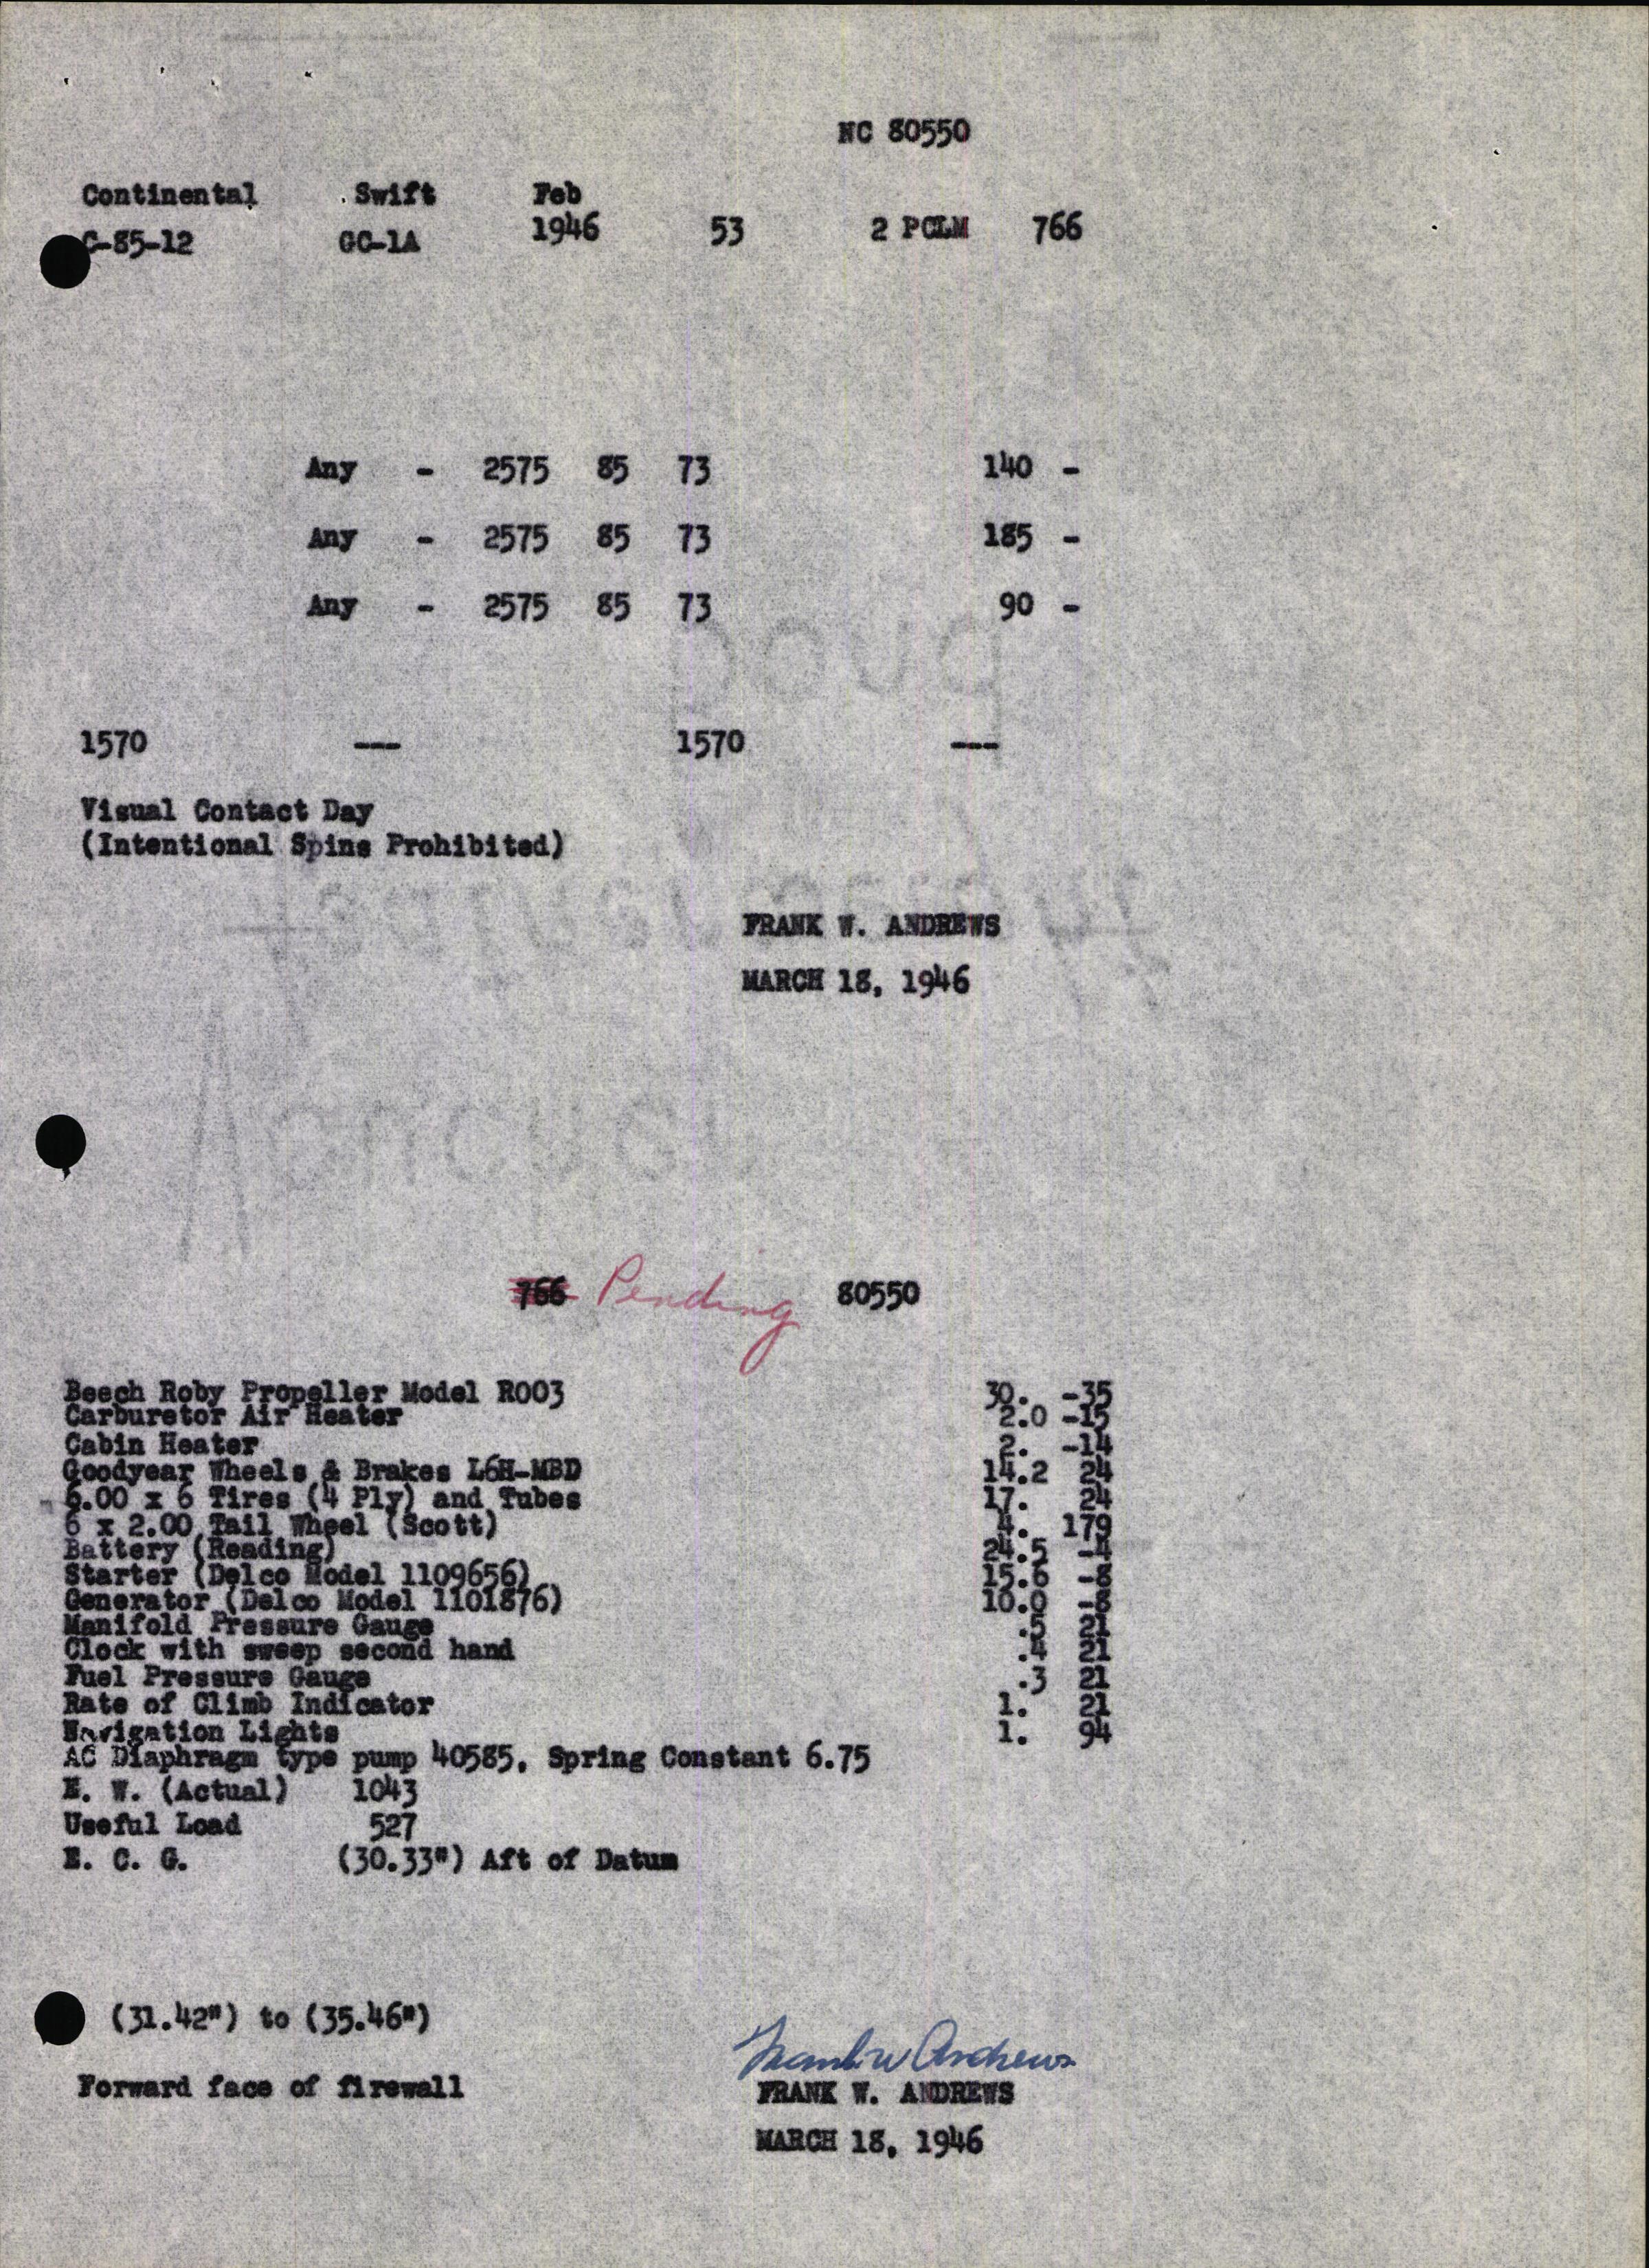 Sample page 7 from AirCorps Library document: Technical Information for Serial Number 53